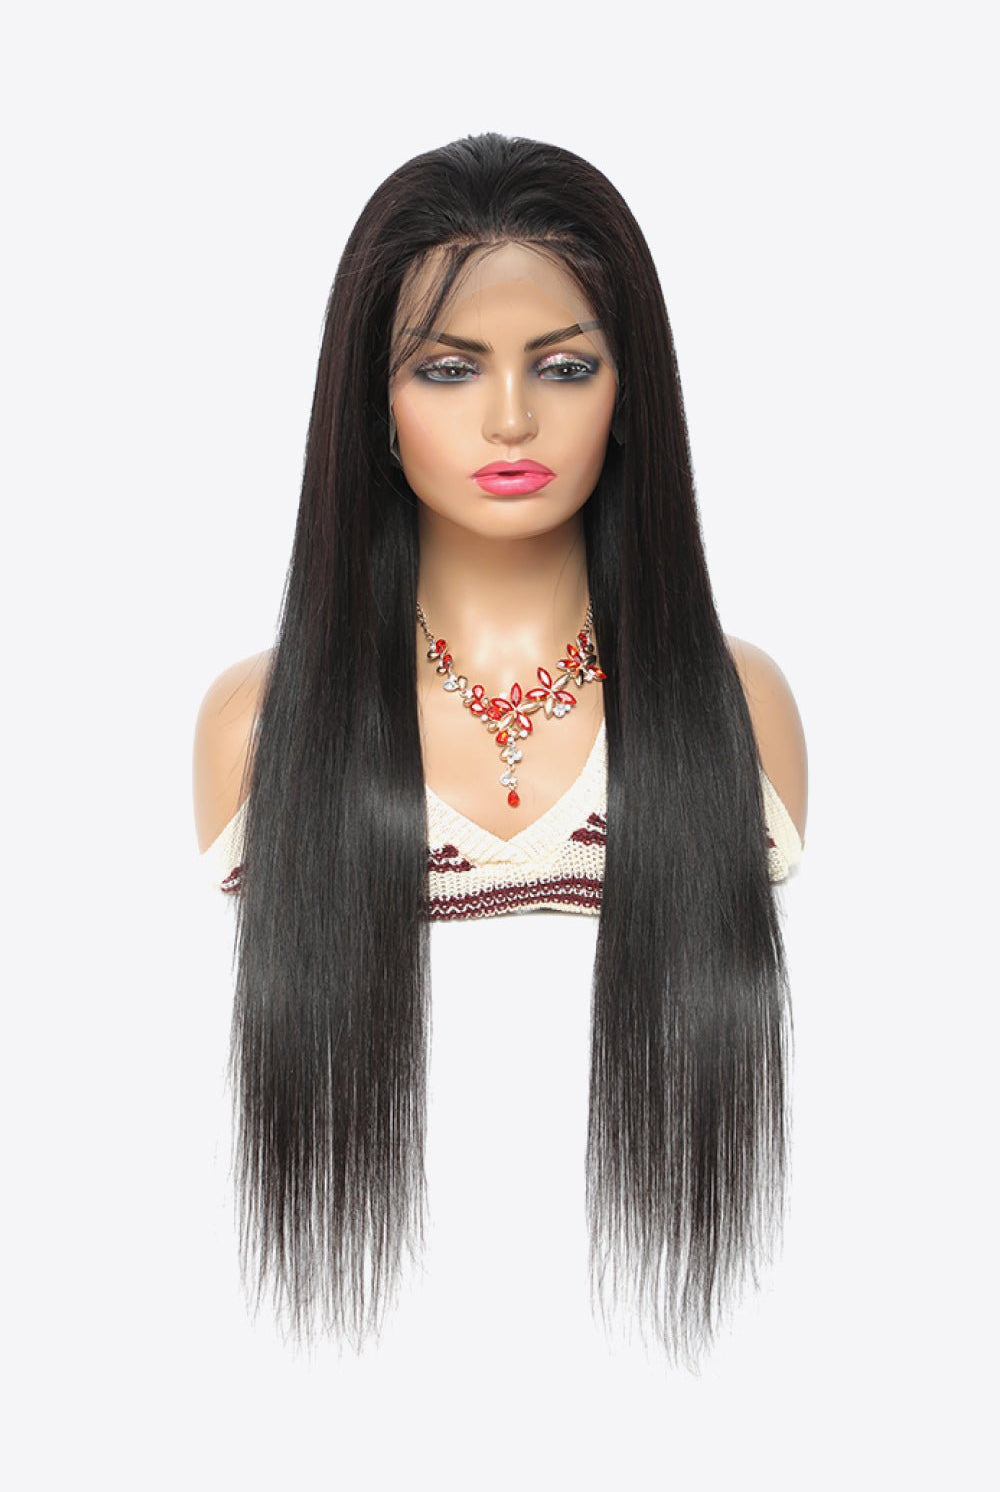 18" 13x4 Lace Front Wigs Virgin Hair Natural Color 150% Density - GemThreads Boutique